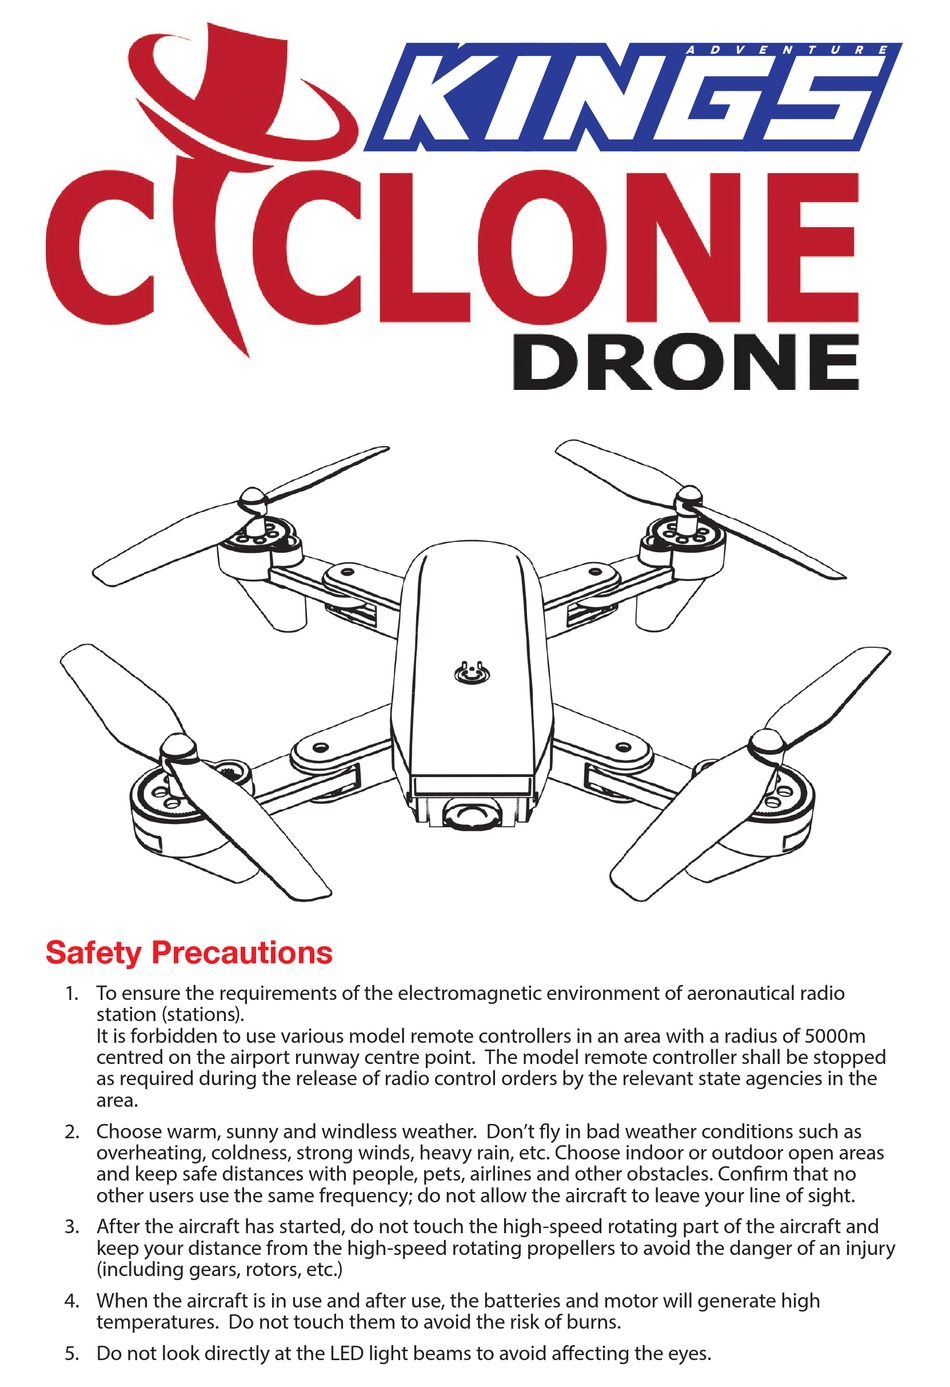 Sanrock Cyclone Drone Instructions - Picture Of Drone